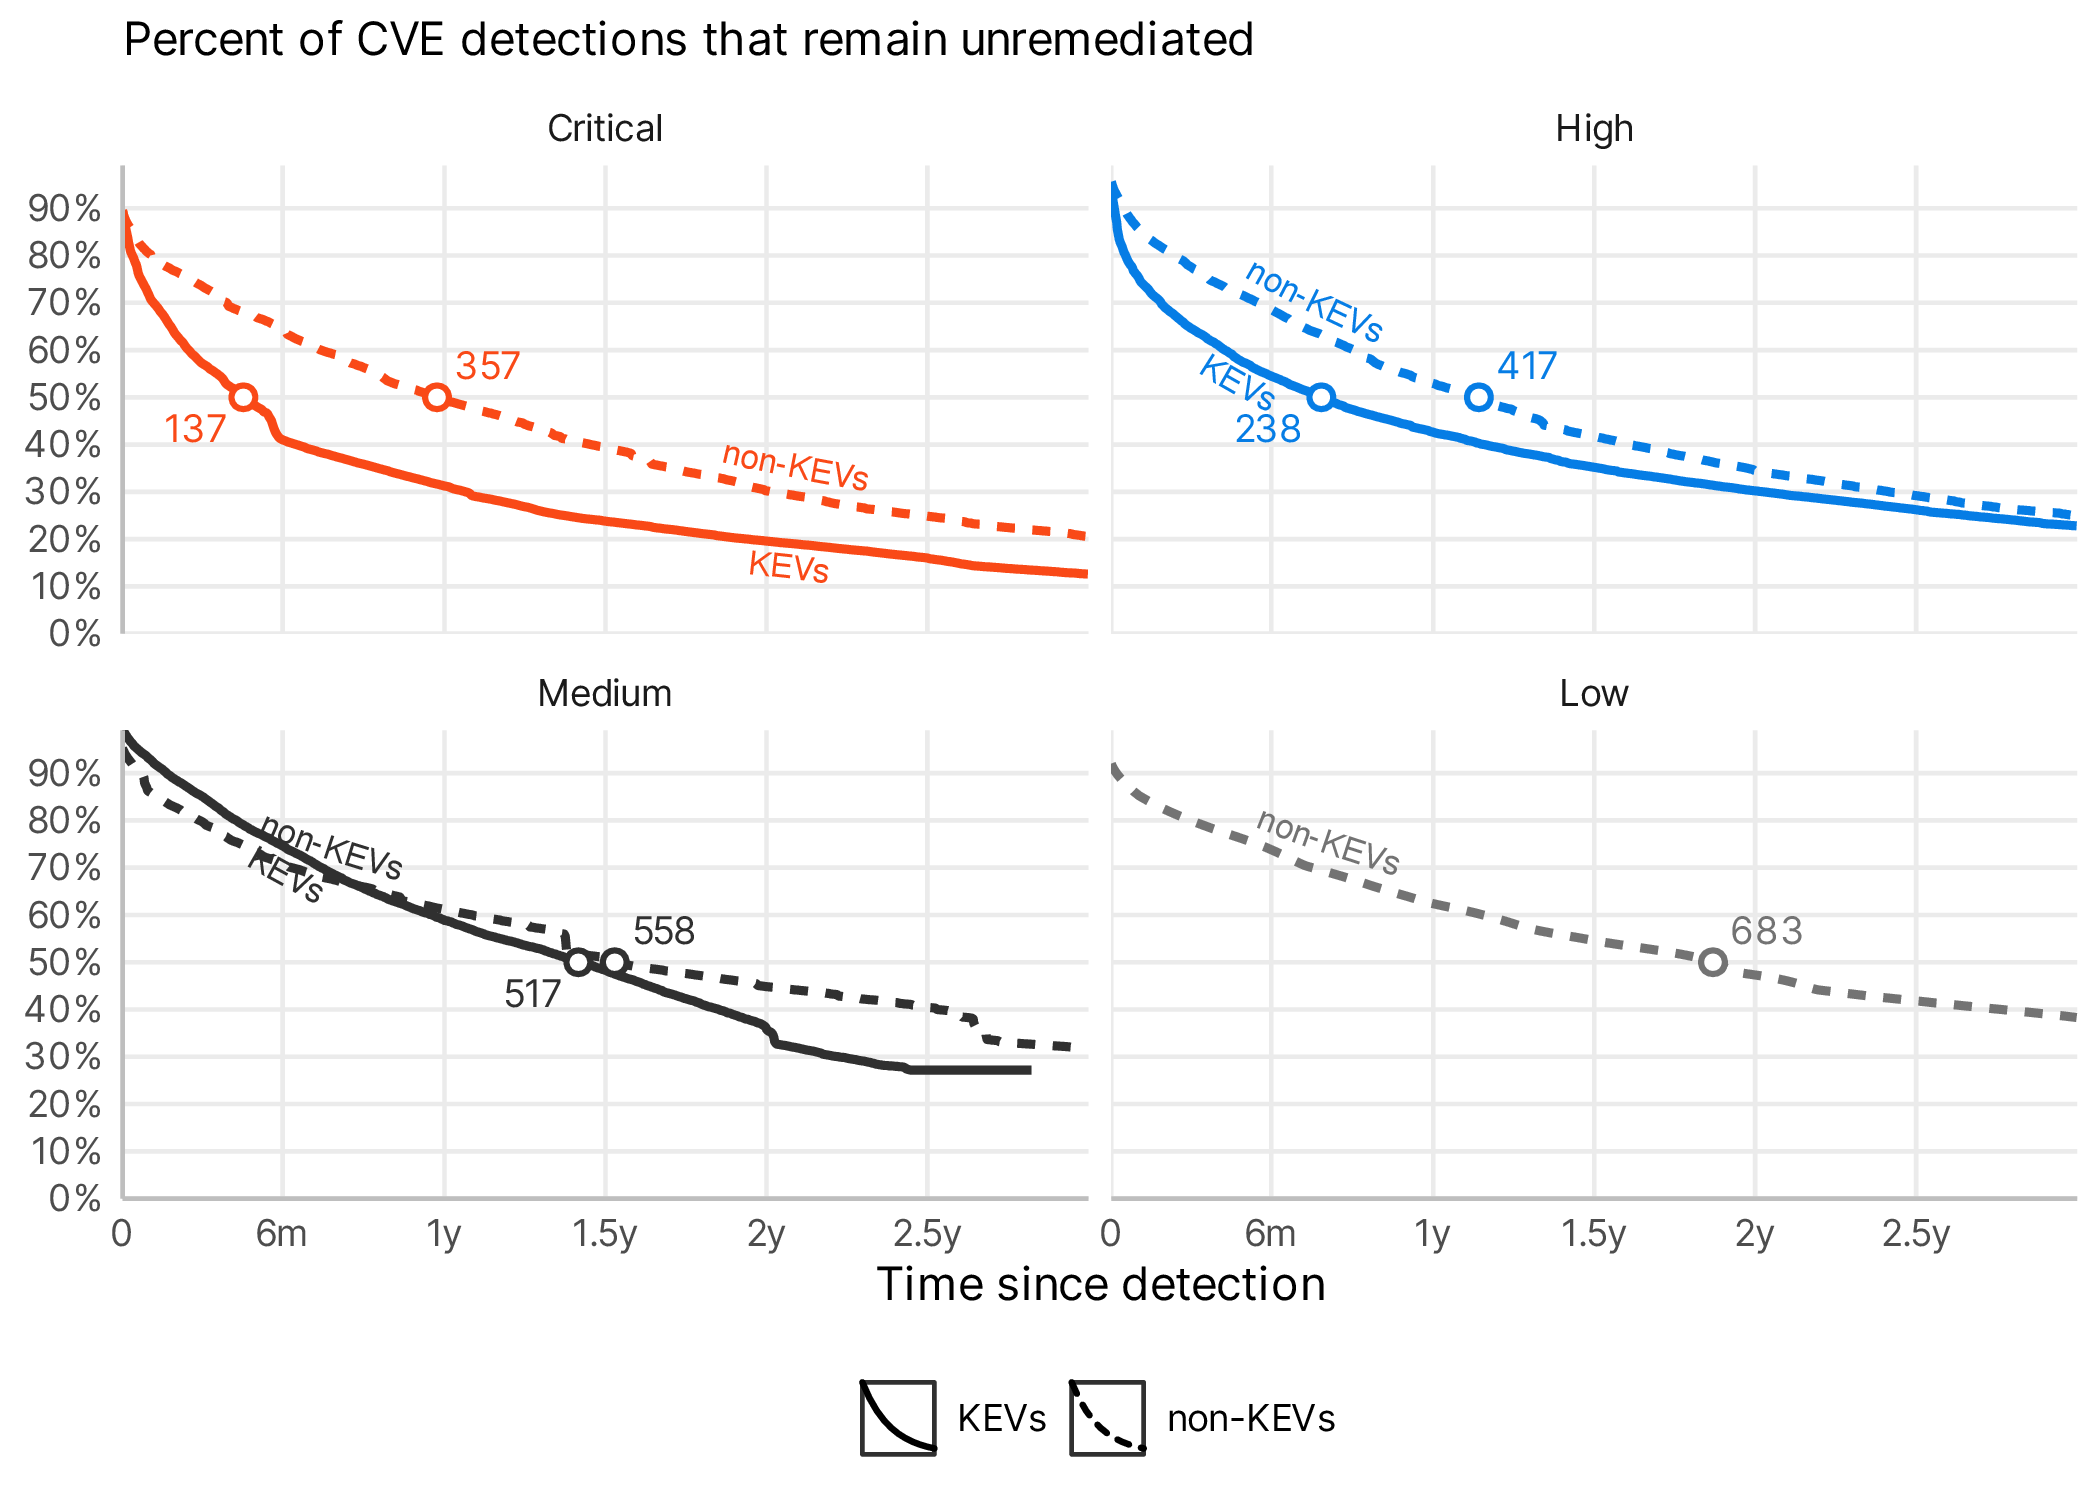 Survival curves showing the percentage of KEVS that remain unremediated.